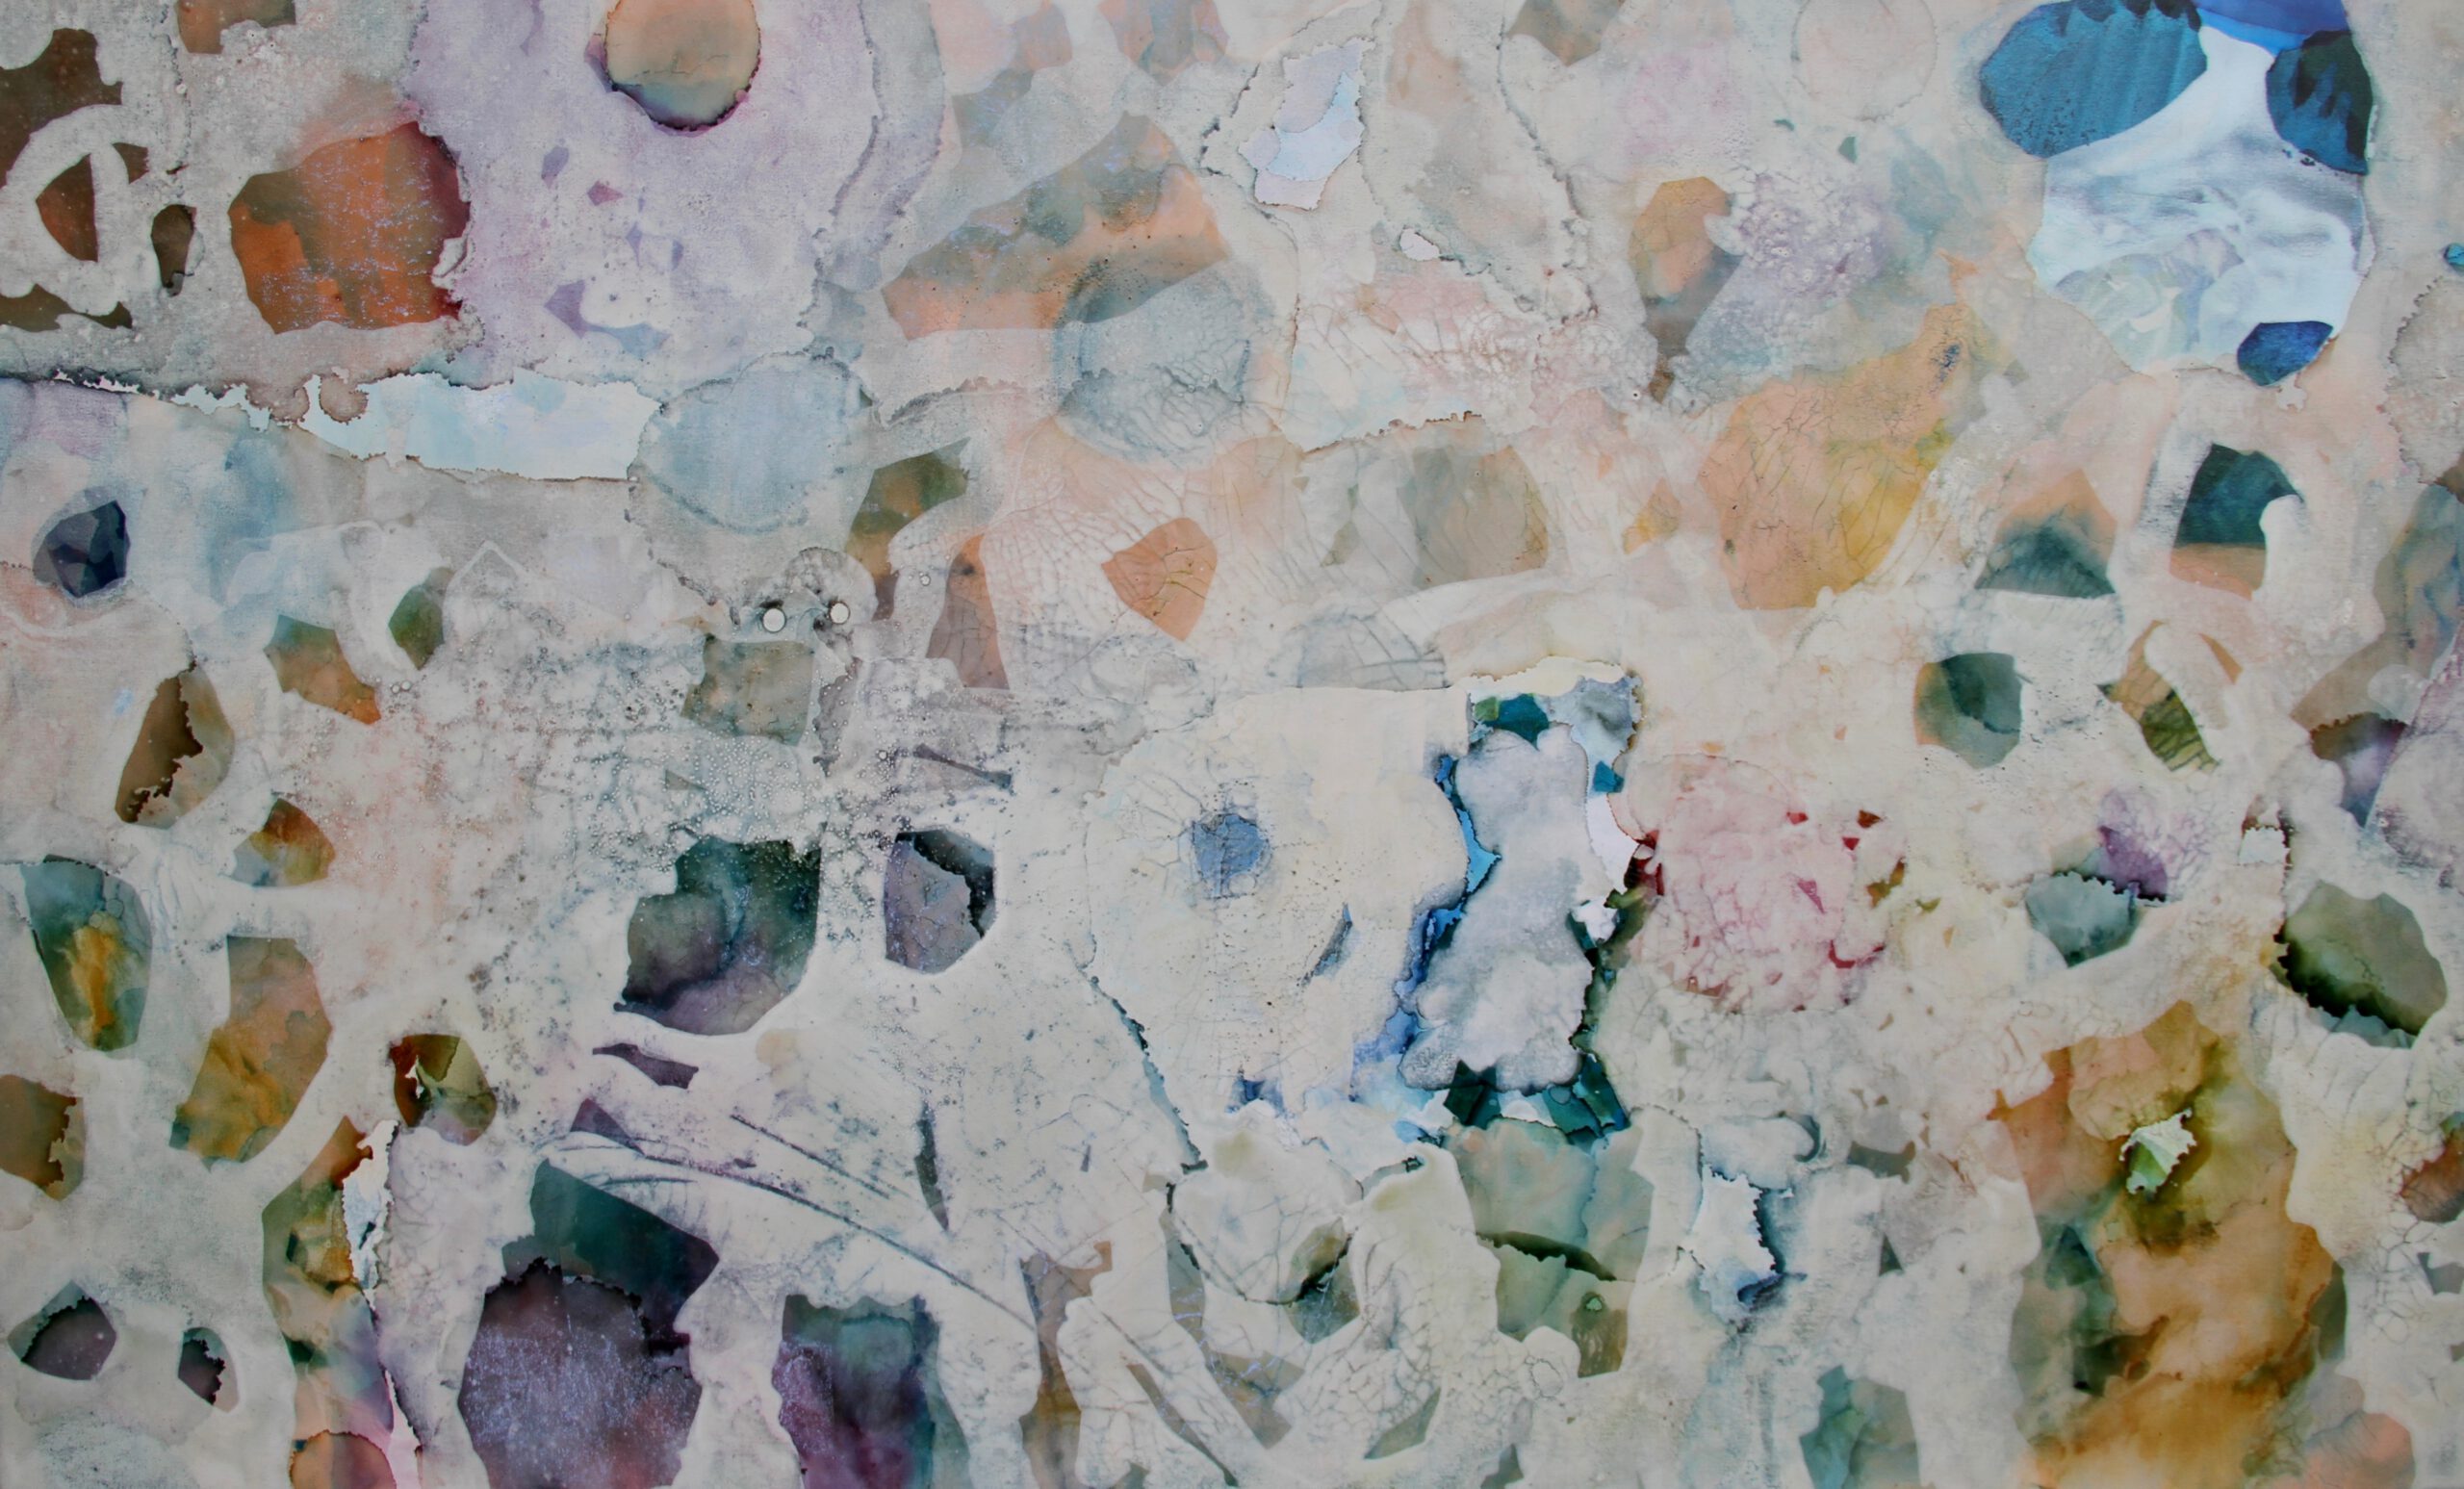 Juniper_Colourfield of elements_mixed media on canvas_90 x 150cm_master